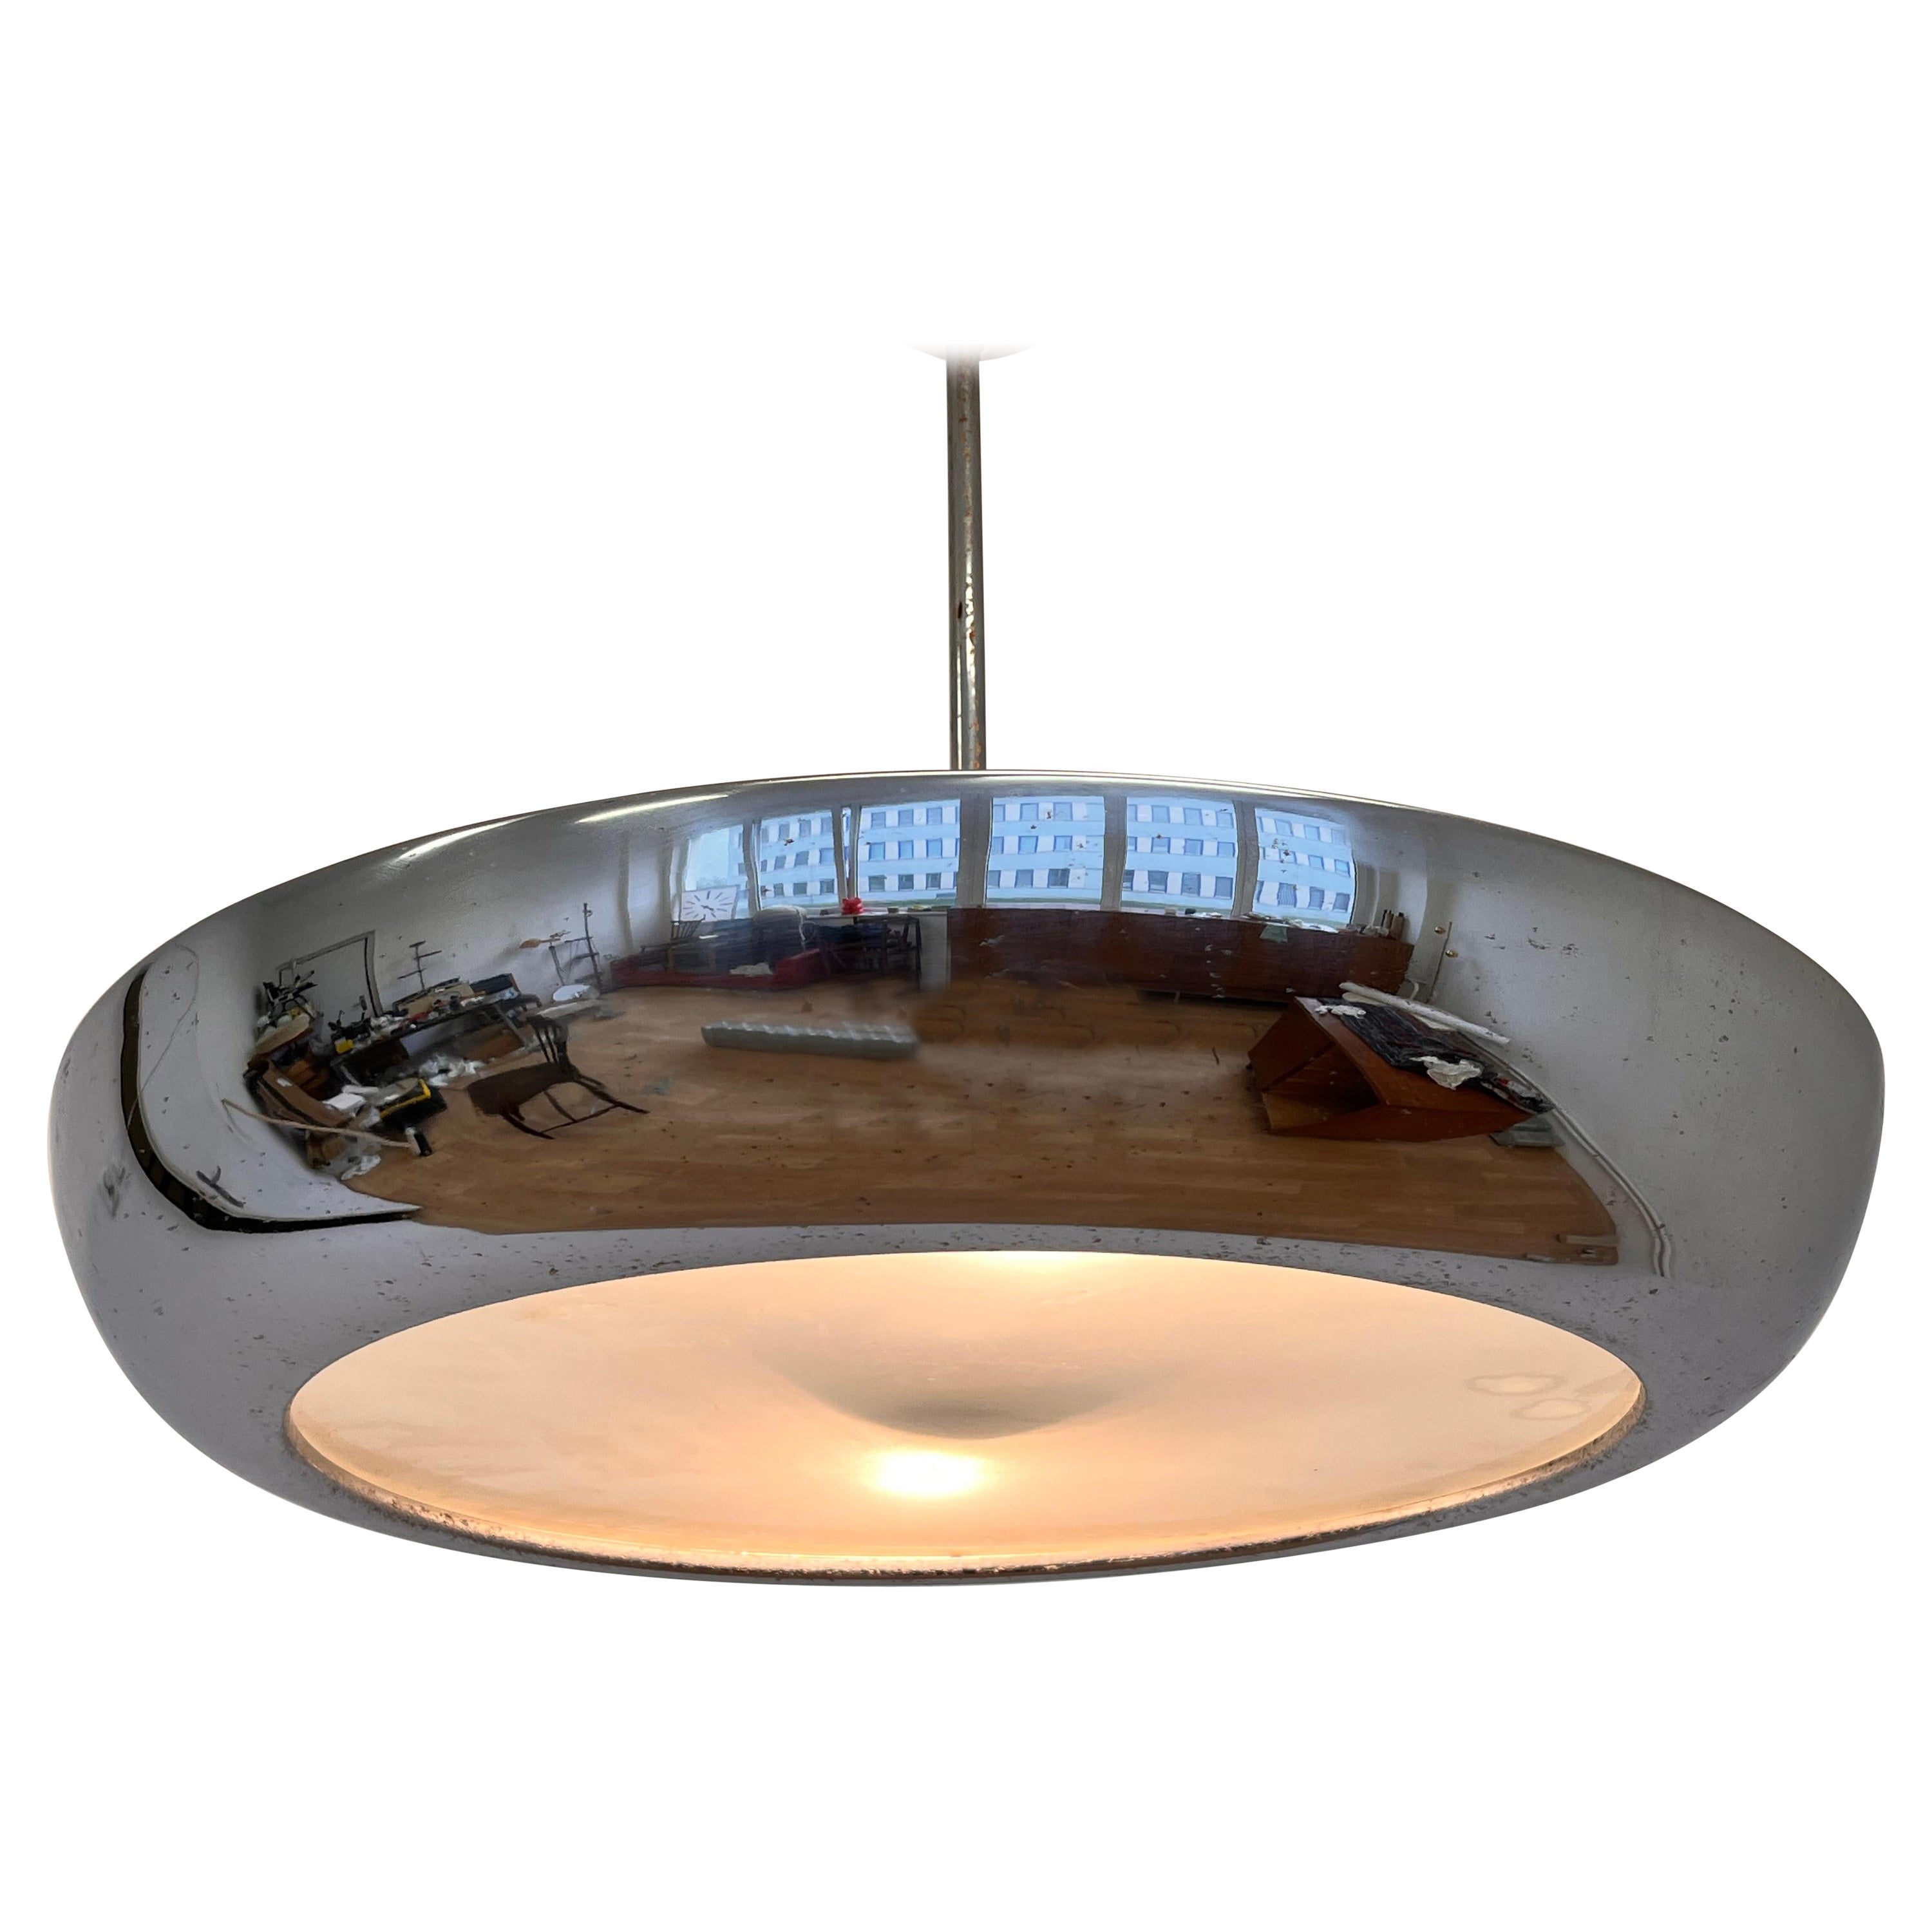 Chrome Bauhaus / Functionalism Pendant UFO by Napako, 1940s For Sale